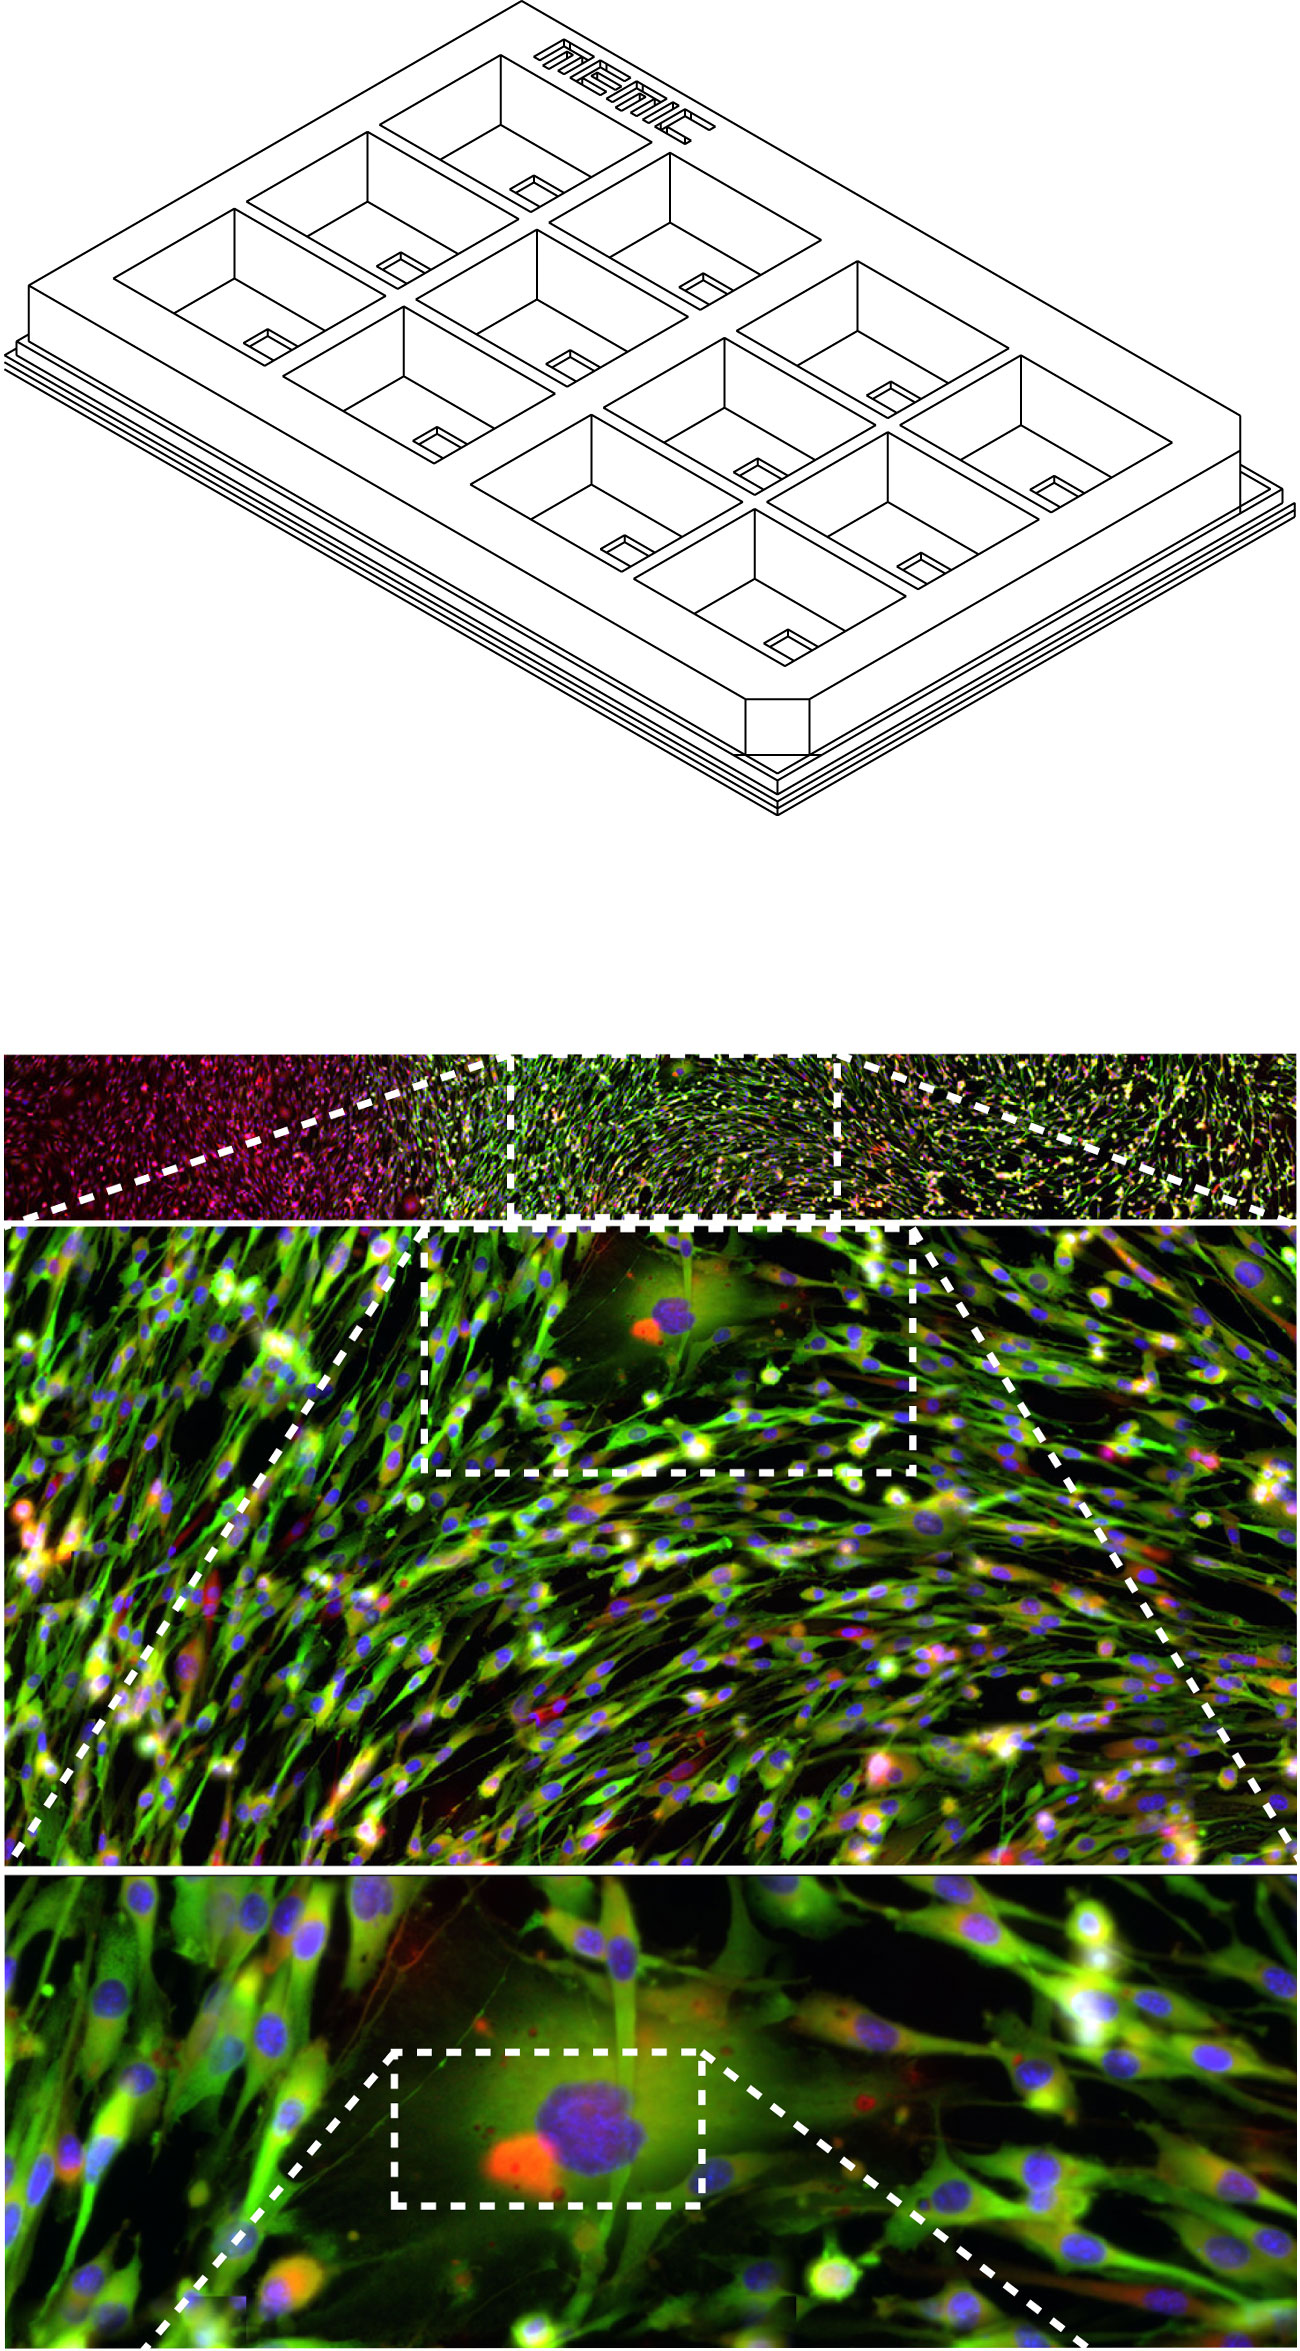 Top: render of MEMIC design. Bottom: Cells cultured in MEMIC that express GFP (green) in response to lack of oxygen.